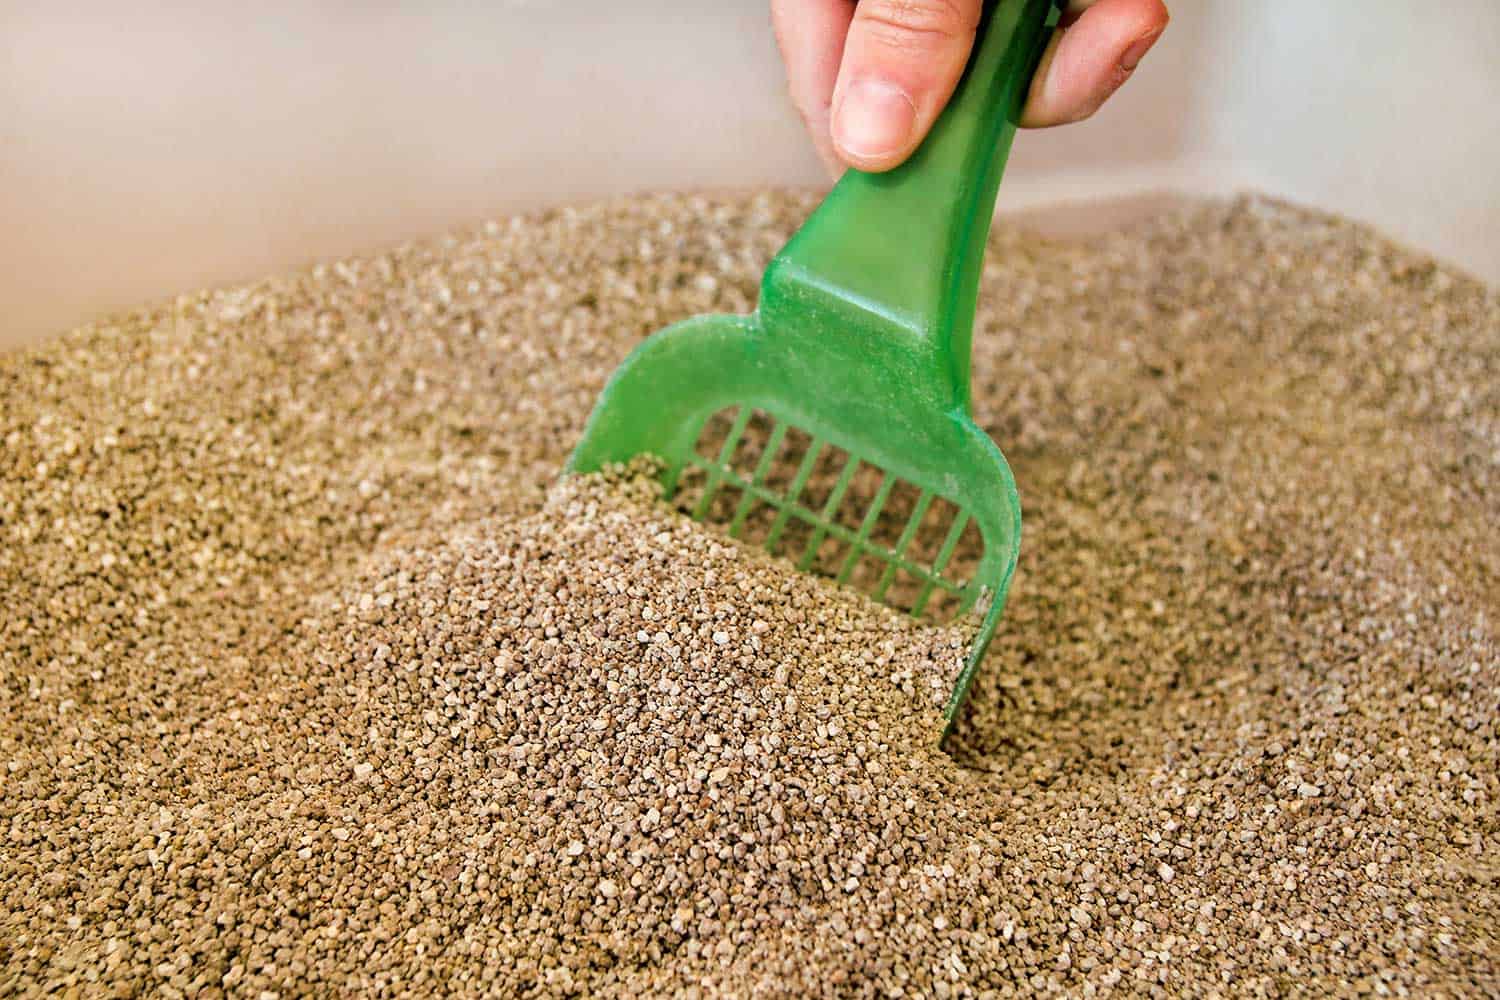 Scooping cat litter box with green spatula